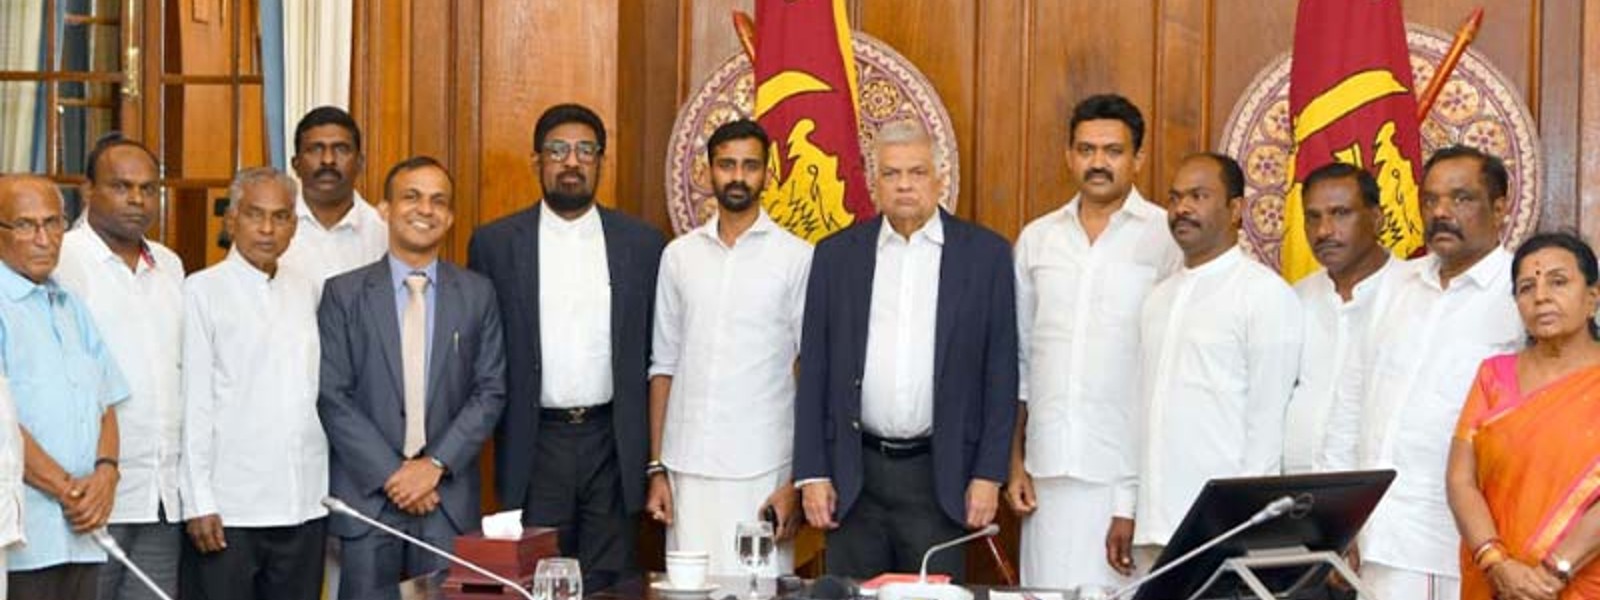 Committee to integrate the hill country Tamils